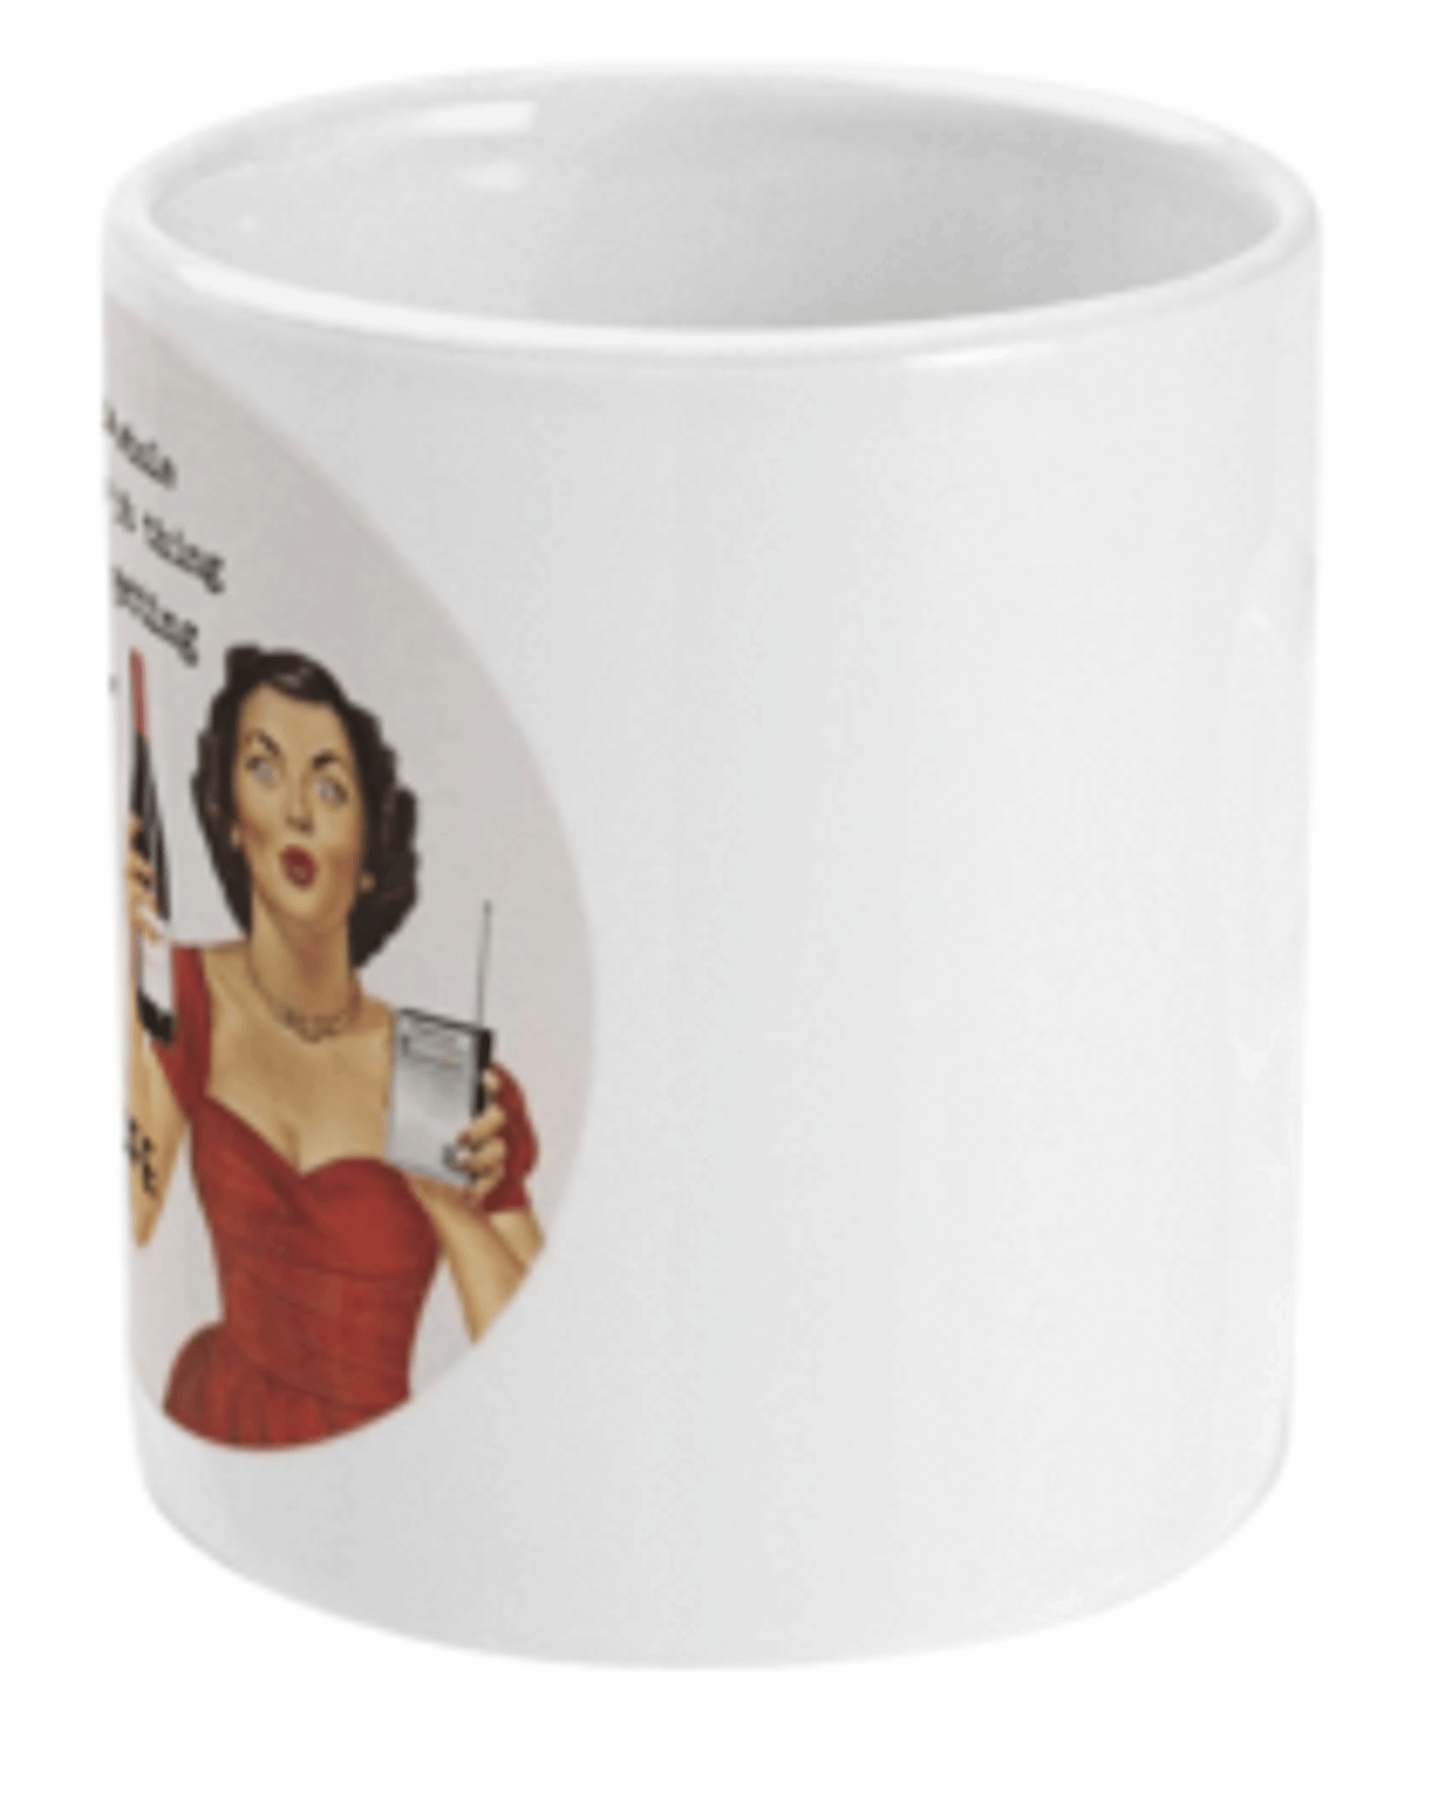  Funny My Job Gets In The Way Vintage Lady Mug by Free Spirit Accessories sold by Free Spirit Accessories